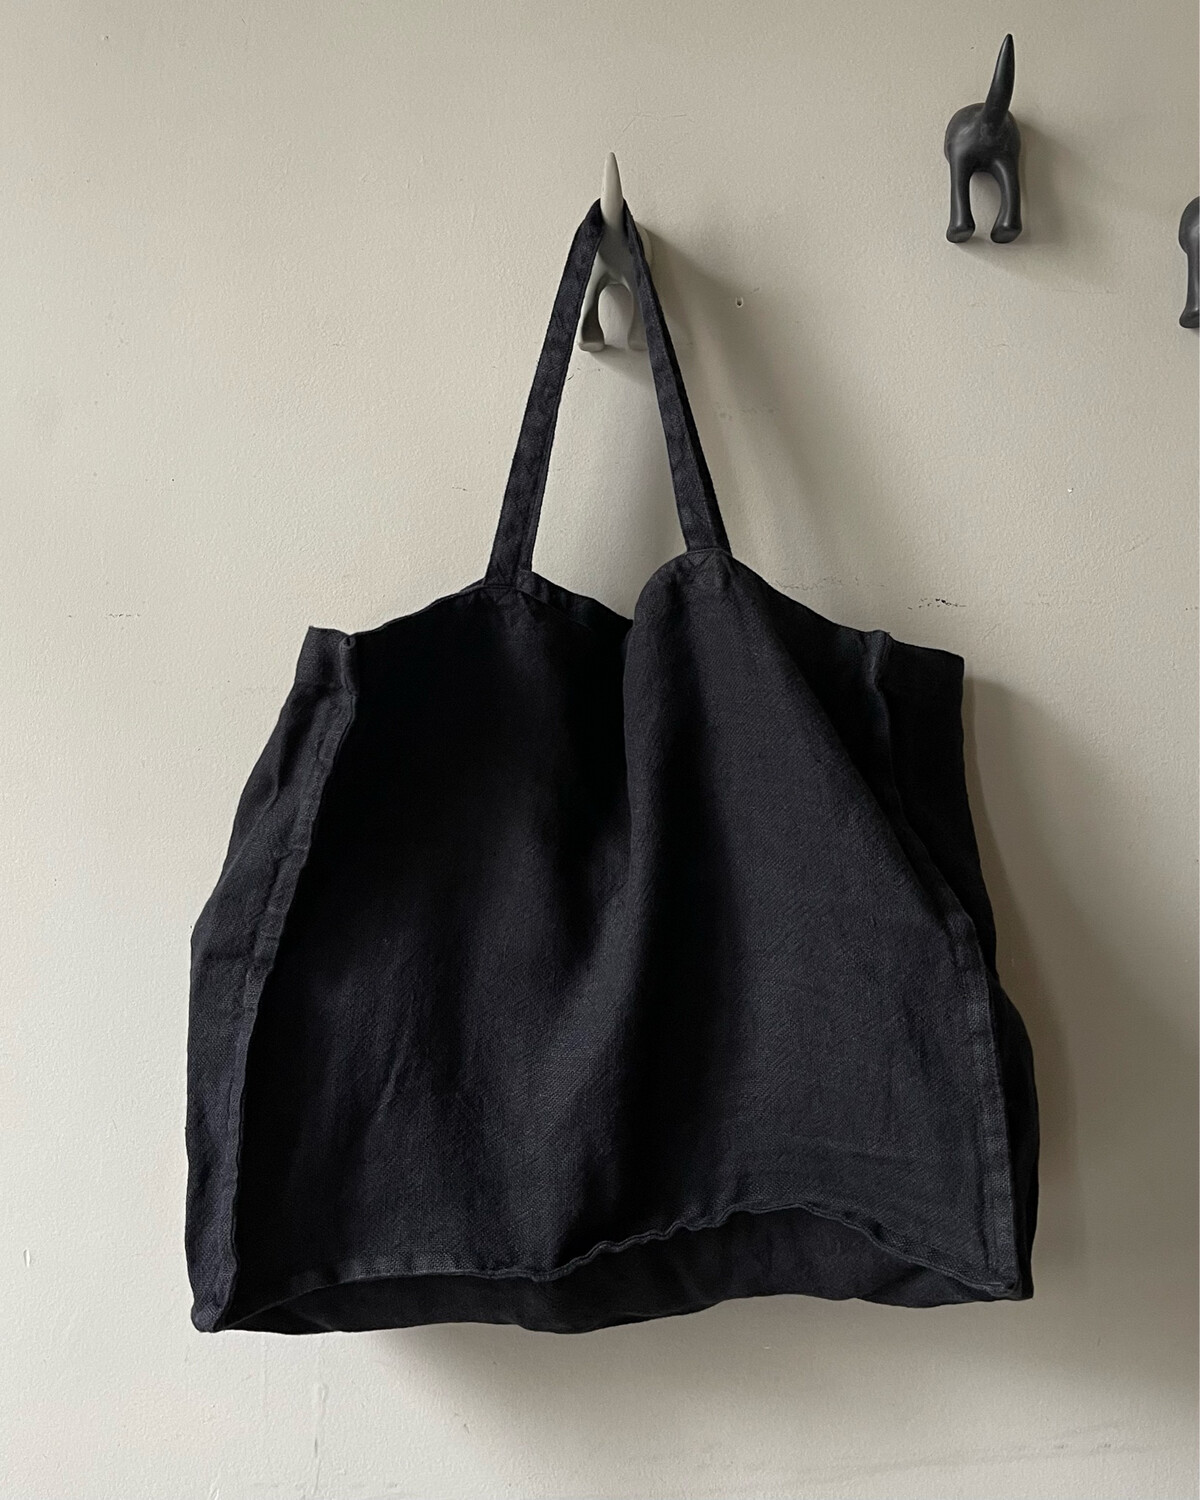 Washed Linen Bag "Heavy Collection" / Grand